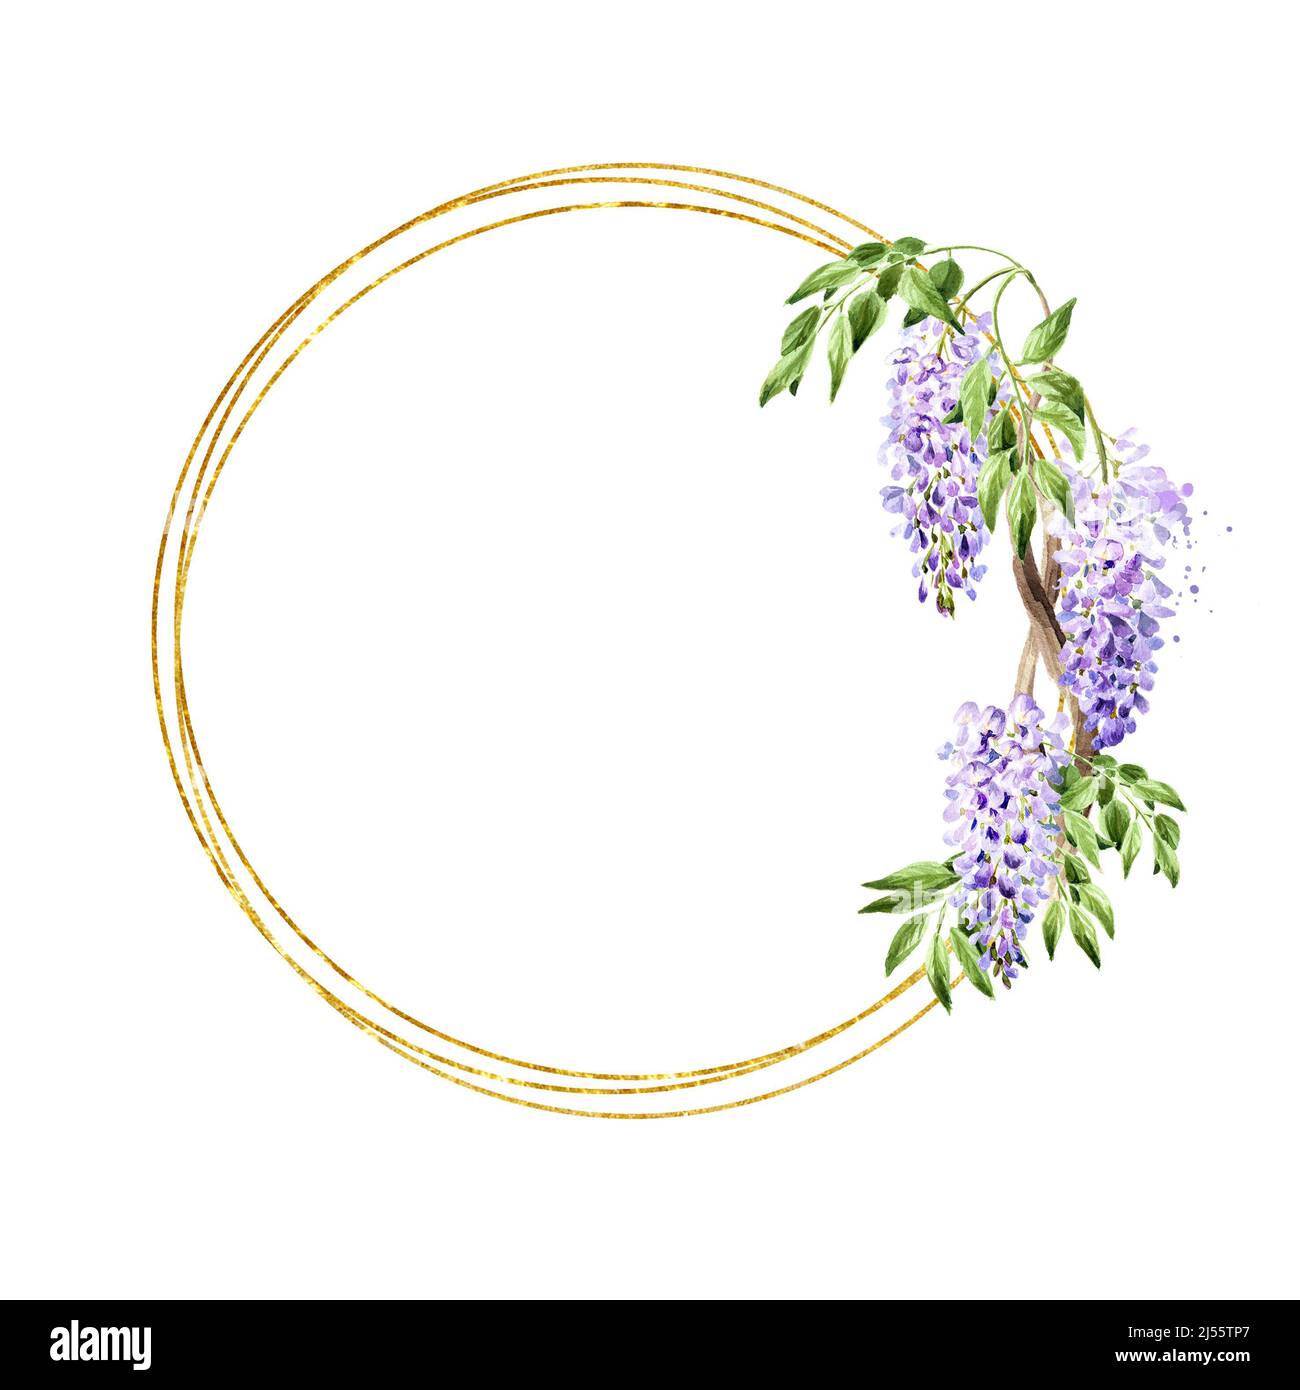 Wisteria flower card, Hand drawn watercolor  illustration isolated on white background Stock Photo